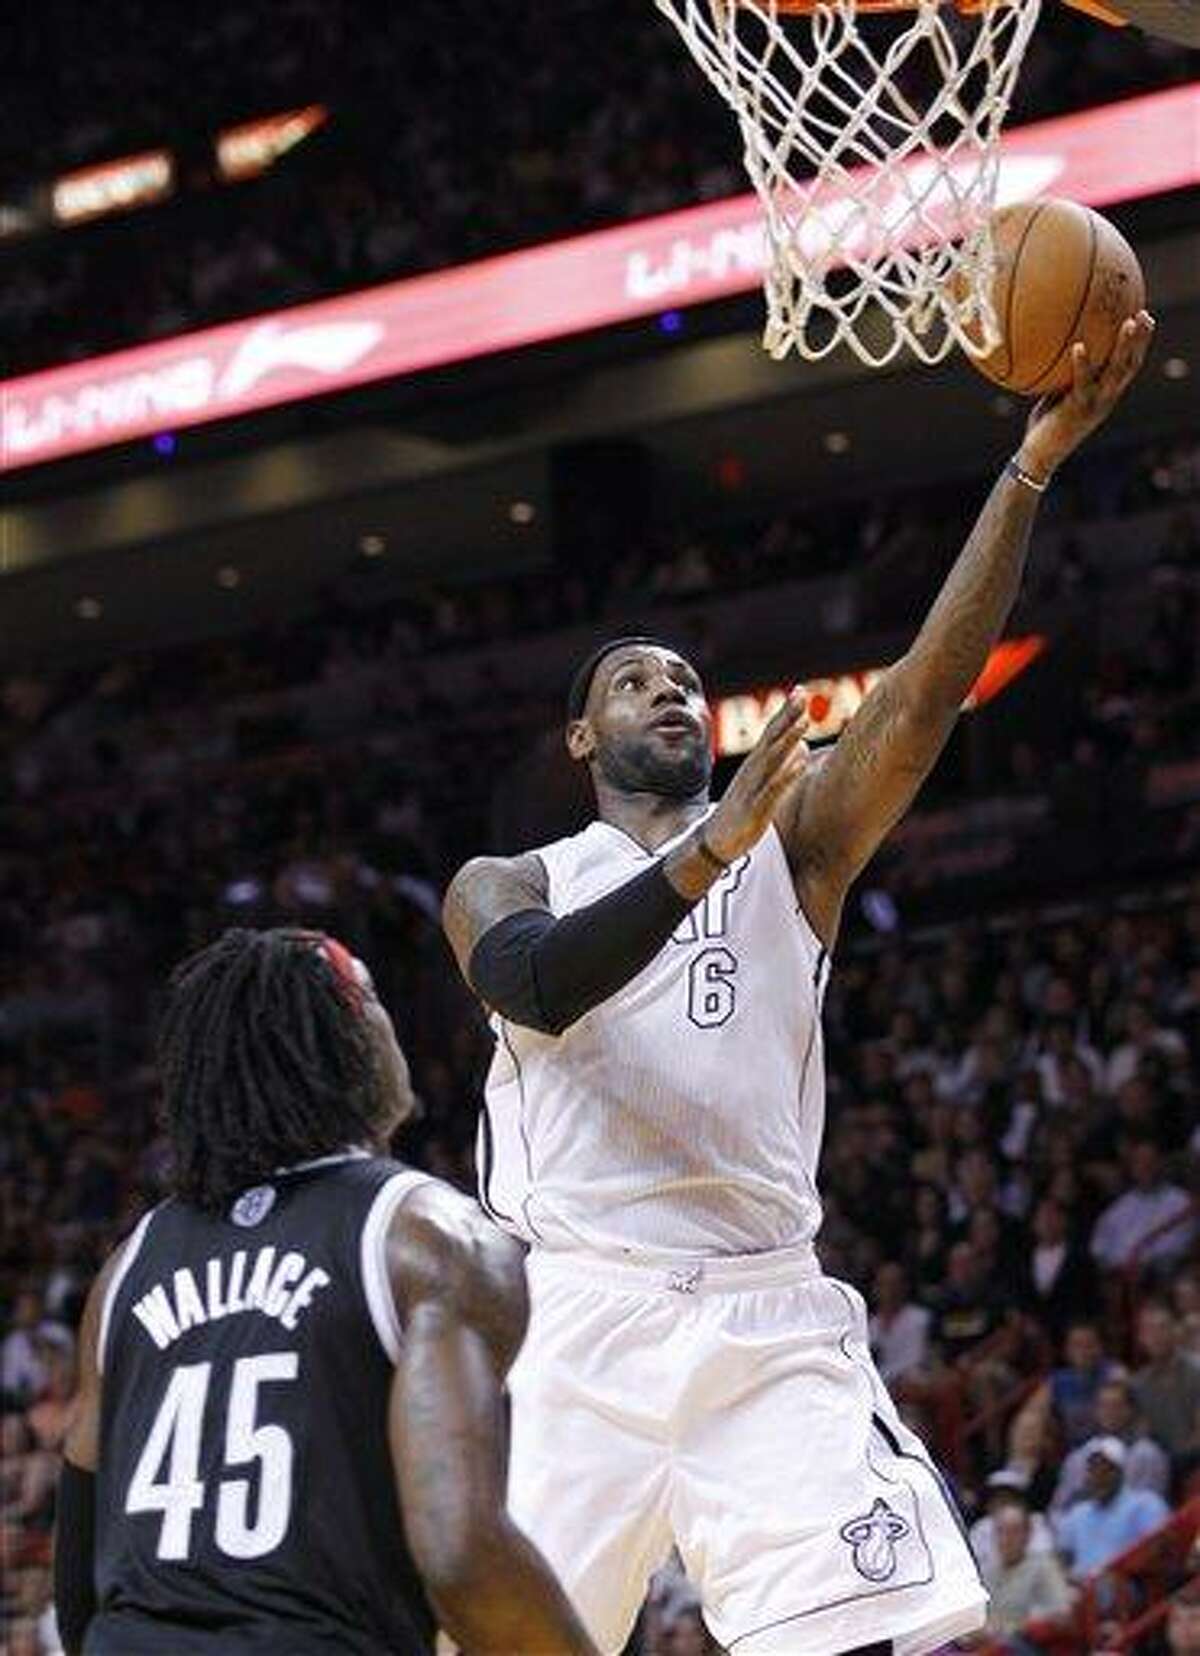 Miami Heat forward LeBron James (6) goes up for a shot against Brooklyn Nets forward Gerald Wallace (45) during the first half of an NBA basketball game, Saturday. AP Photo/Wilfredo Lee